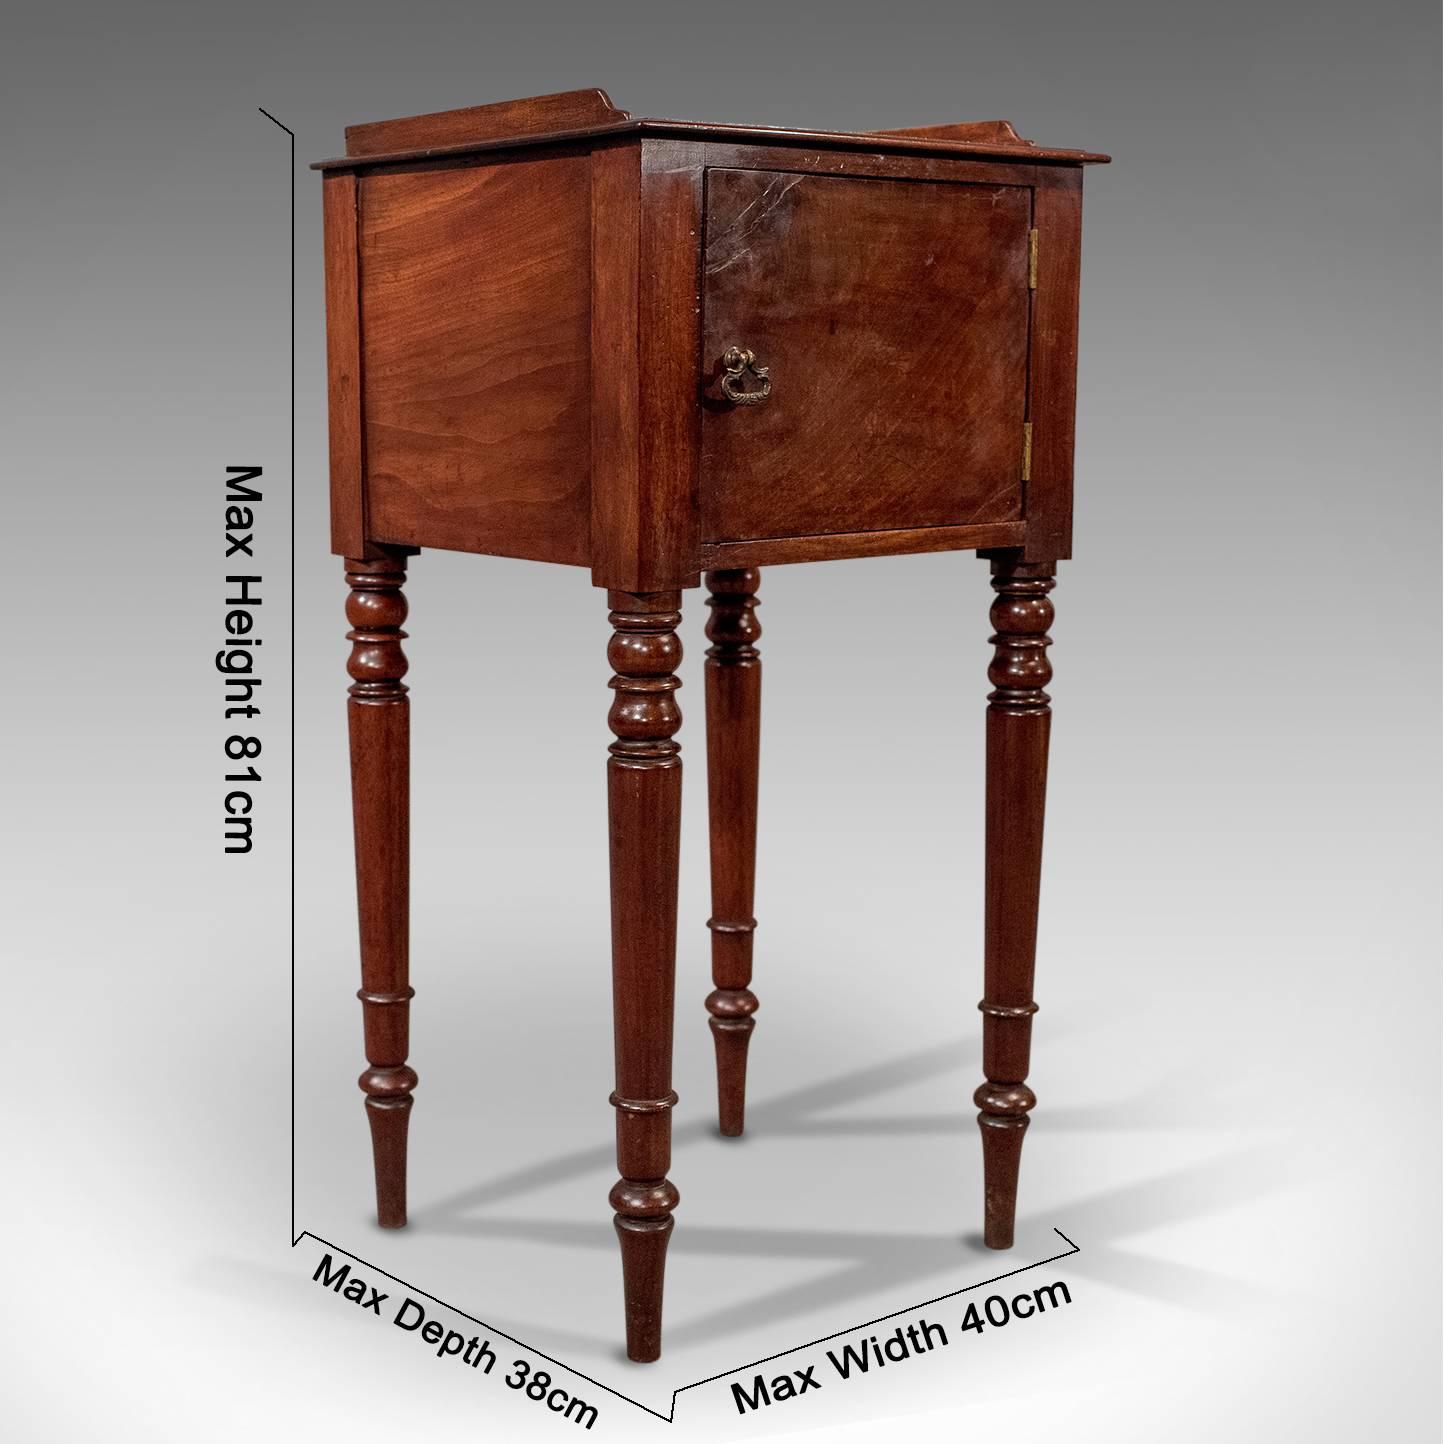 A most pleasing narrow side cabinet presented in good antique condition
Classic Georgian item of functional display furniture - useful as a night stand, bedside, jardinière or narrow side cabinet
Well-crafted in mahogany
Delightfully dressed with